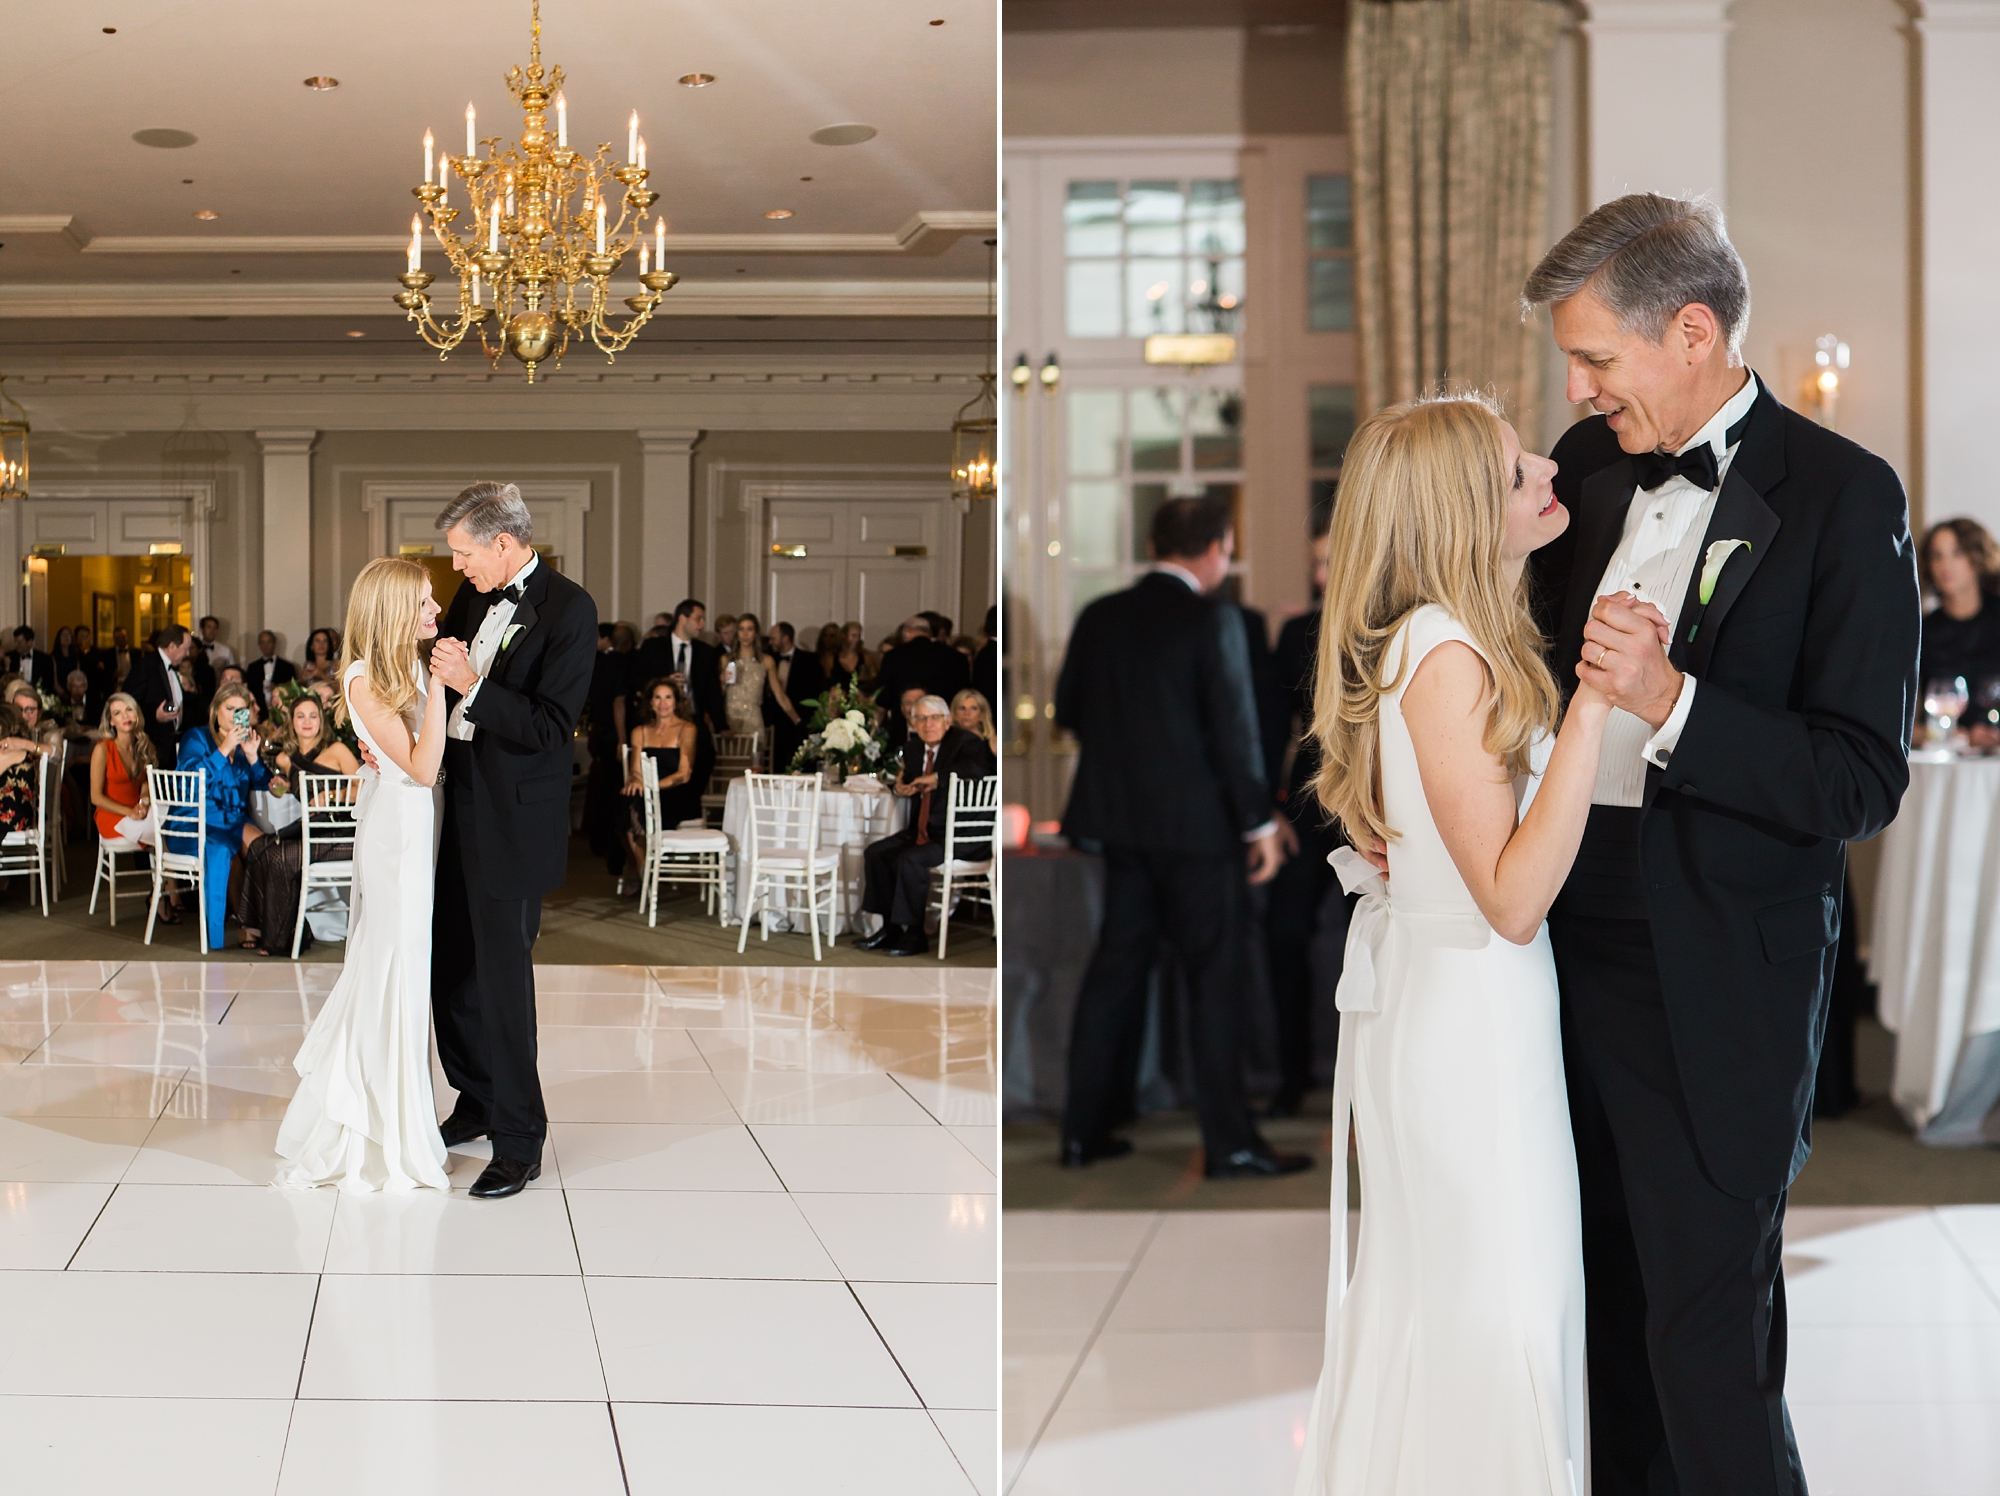 Father daughter dance at prestigious East Lake Golf Club. All photos by Atlanta's Top Wedding Photographers Leigh and Becca.